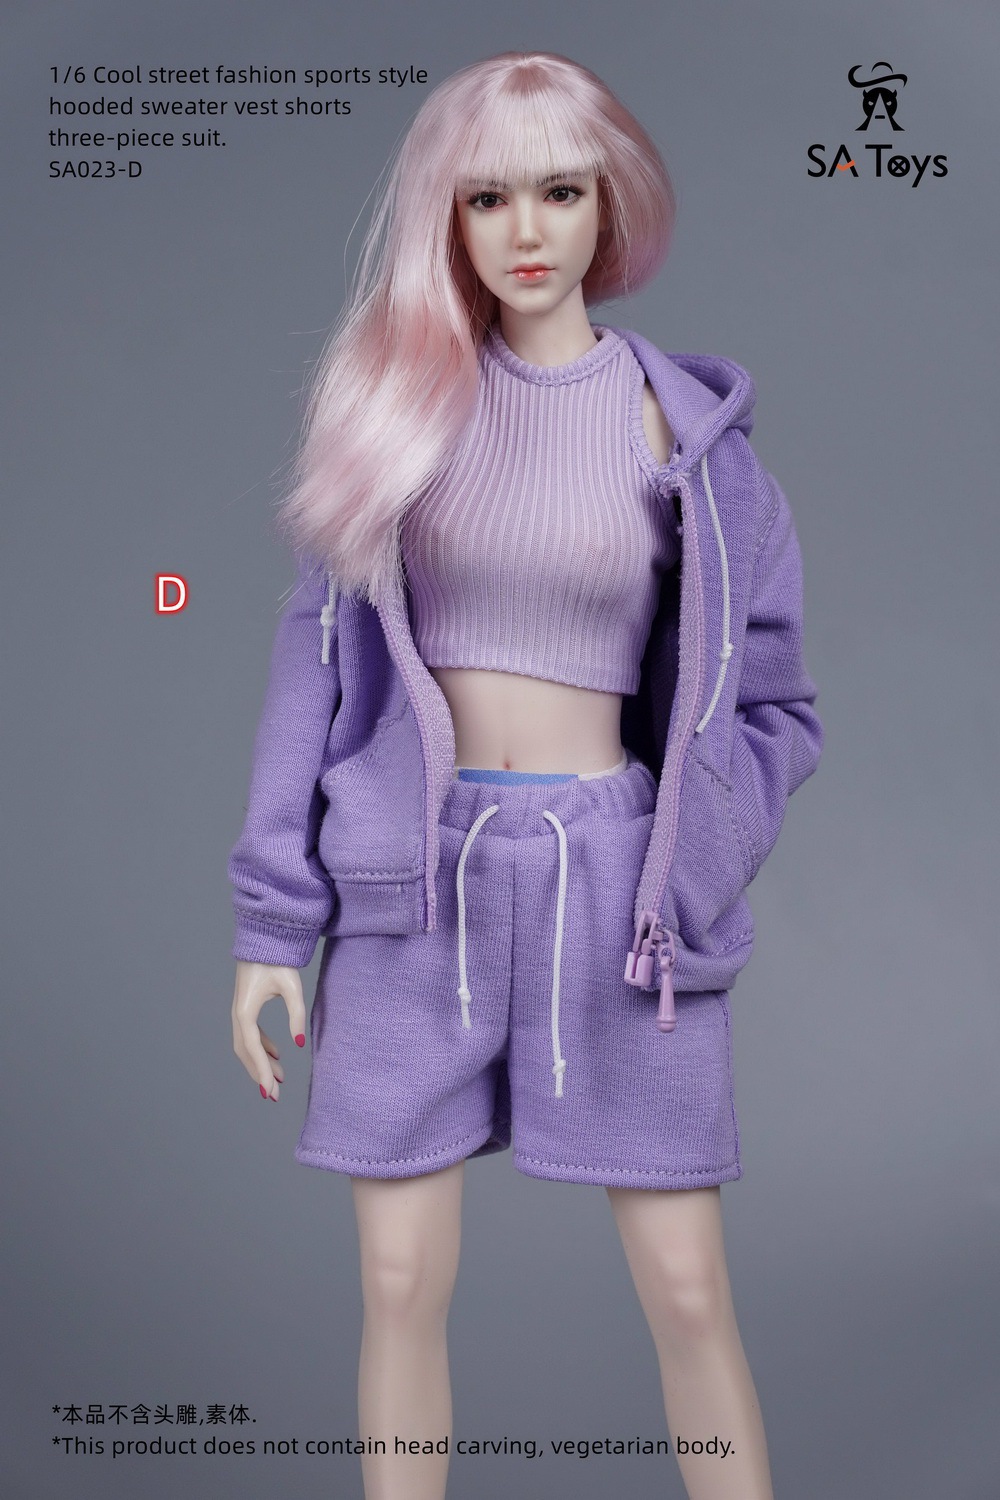 fashionablesportshoody - NEW PRODUCT: SA Toys: 1/6 hip skirt / floral elastic skirt / fashionable sports style hooded sweater cover, hip-hop fisherman hat halter and footwear casual pants [variety optional] 17020310